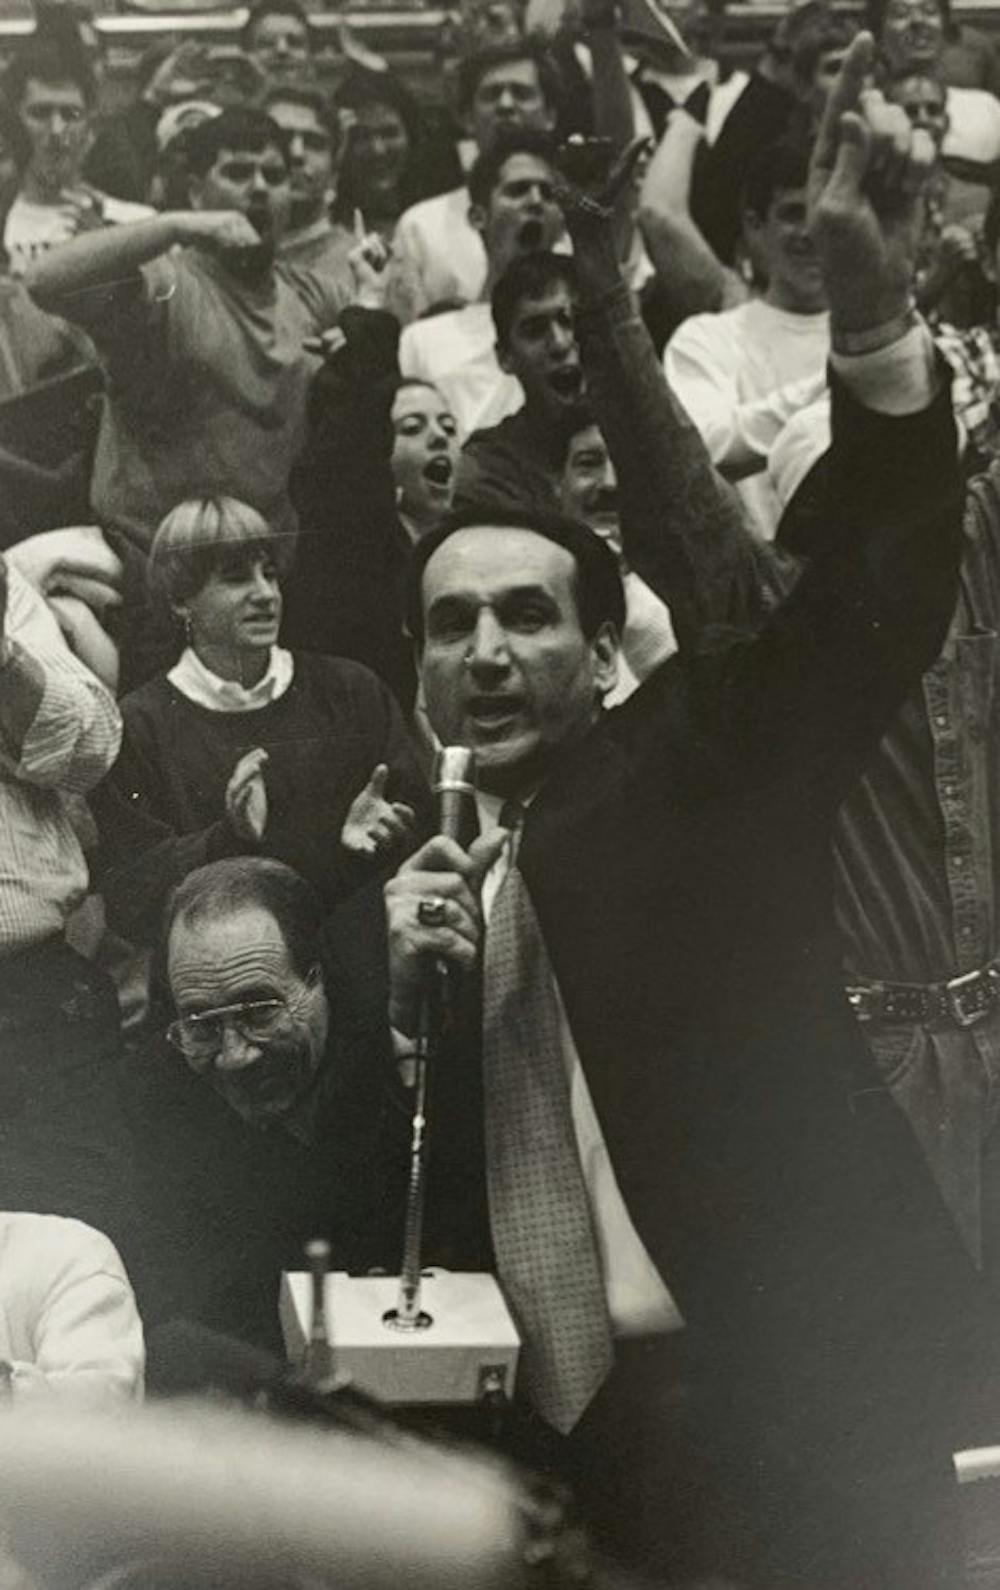 A look into Coach K's career before Duke - The Chronicle